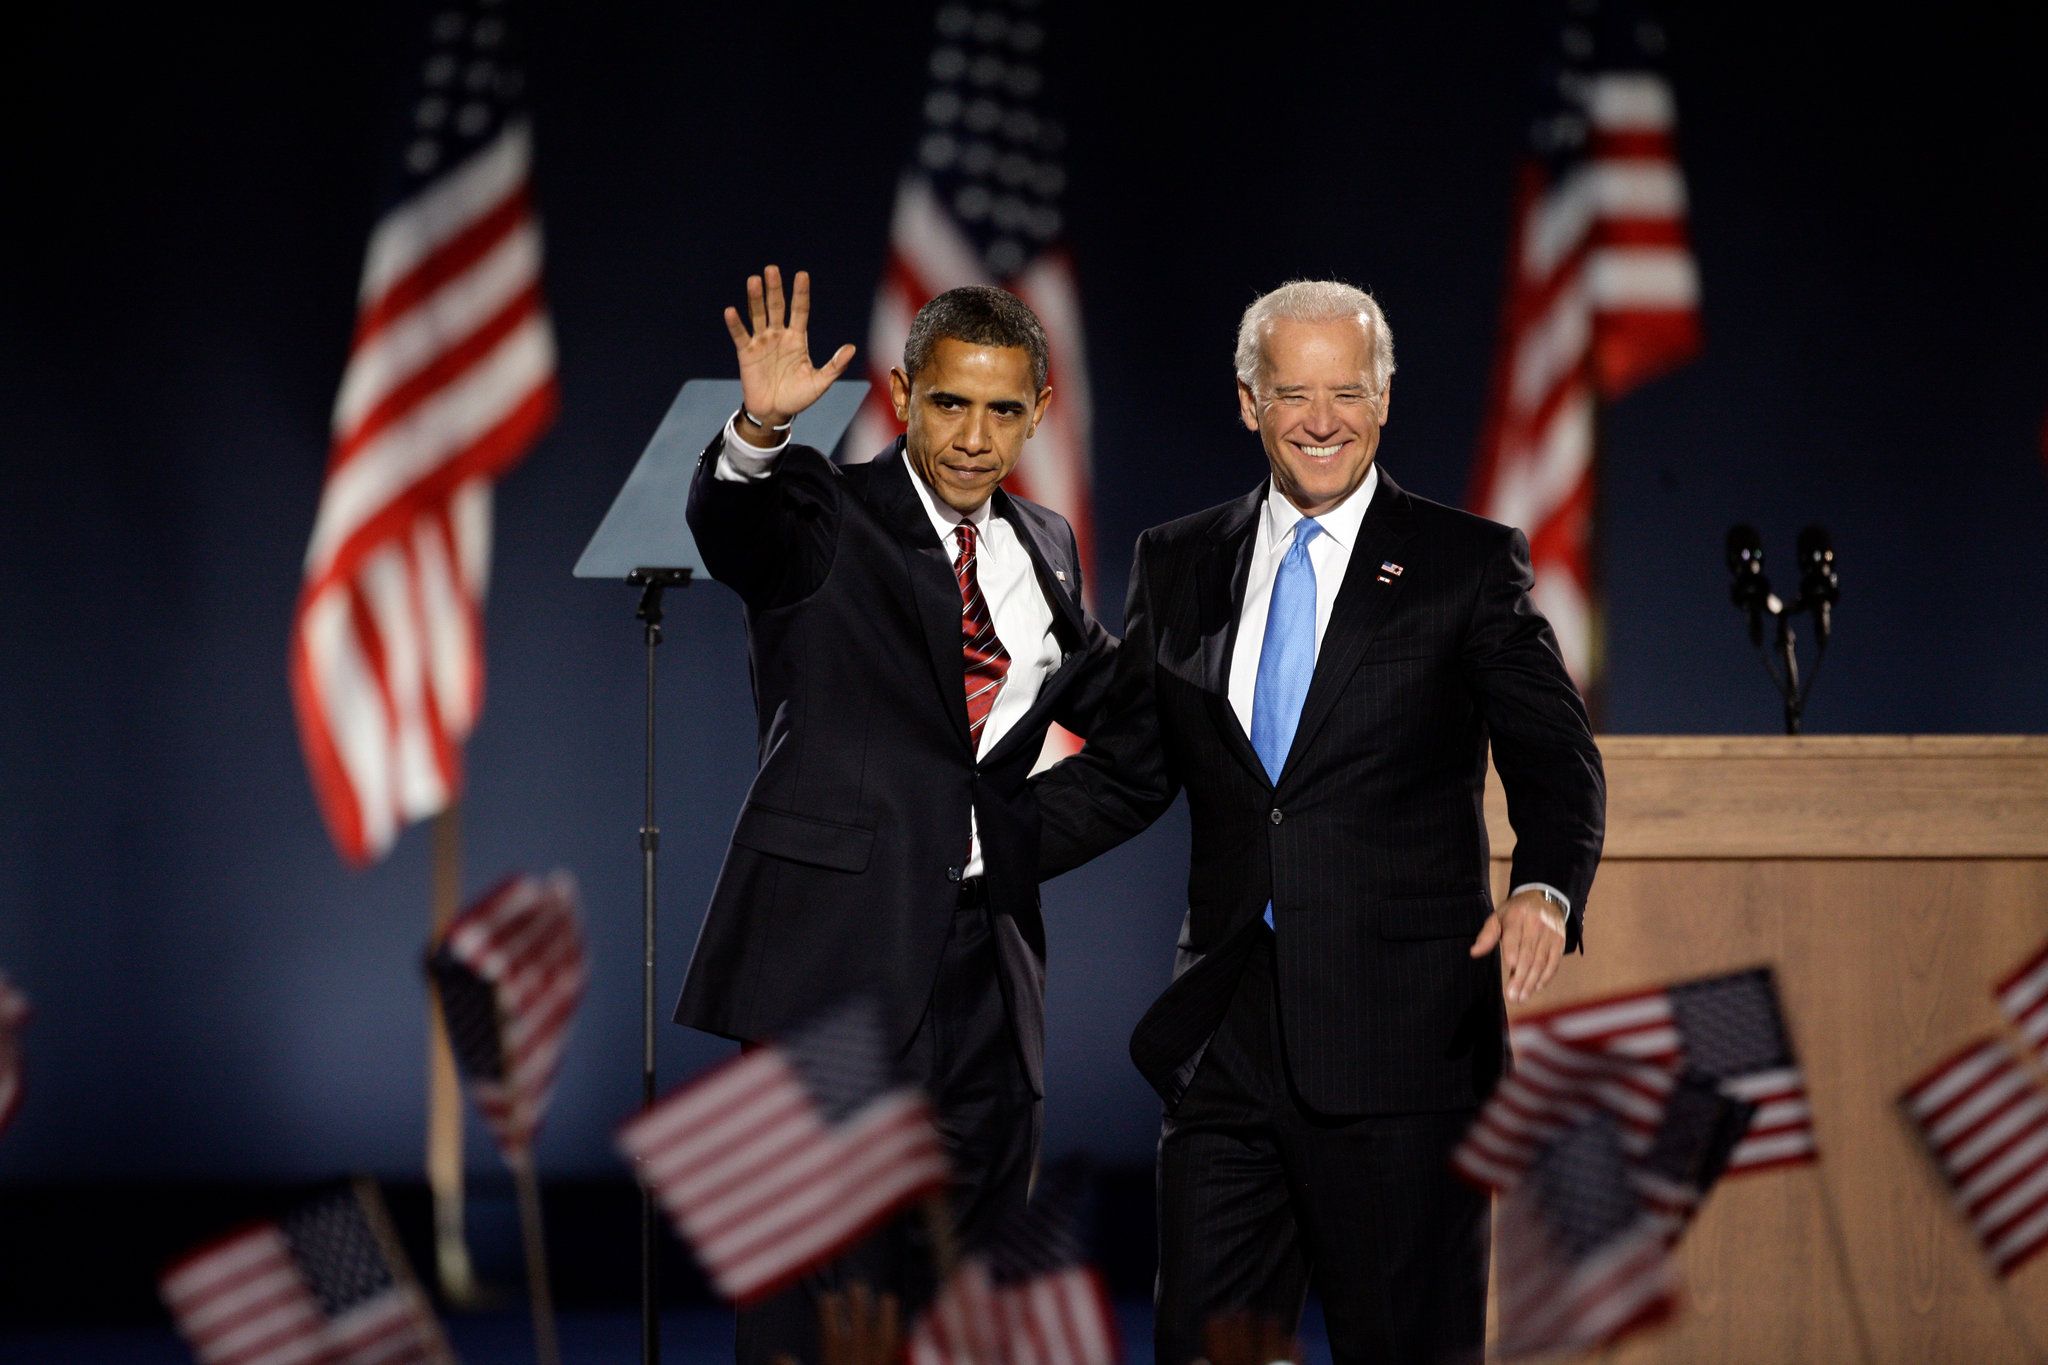 Biden and Obama's 'Odd Couple' Relationship Aged Into Family Ties